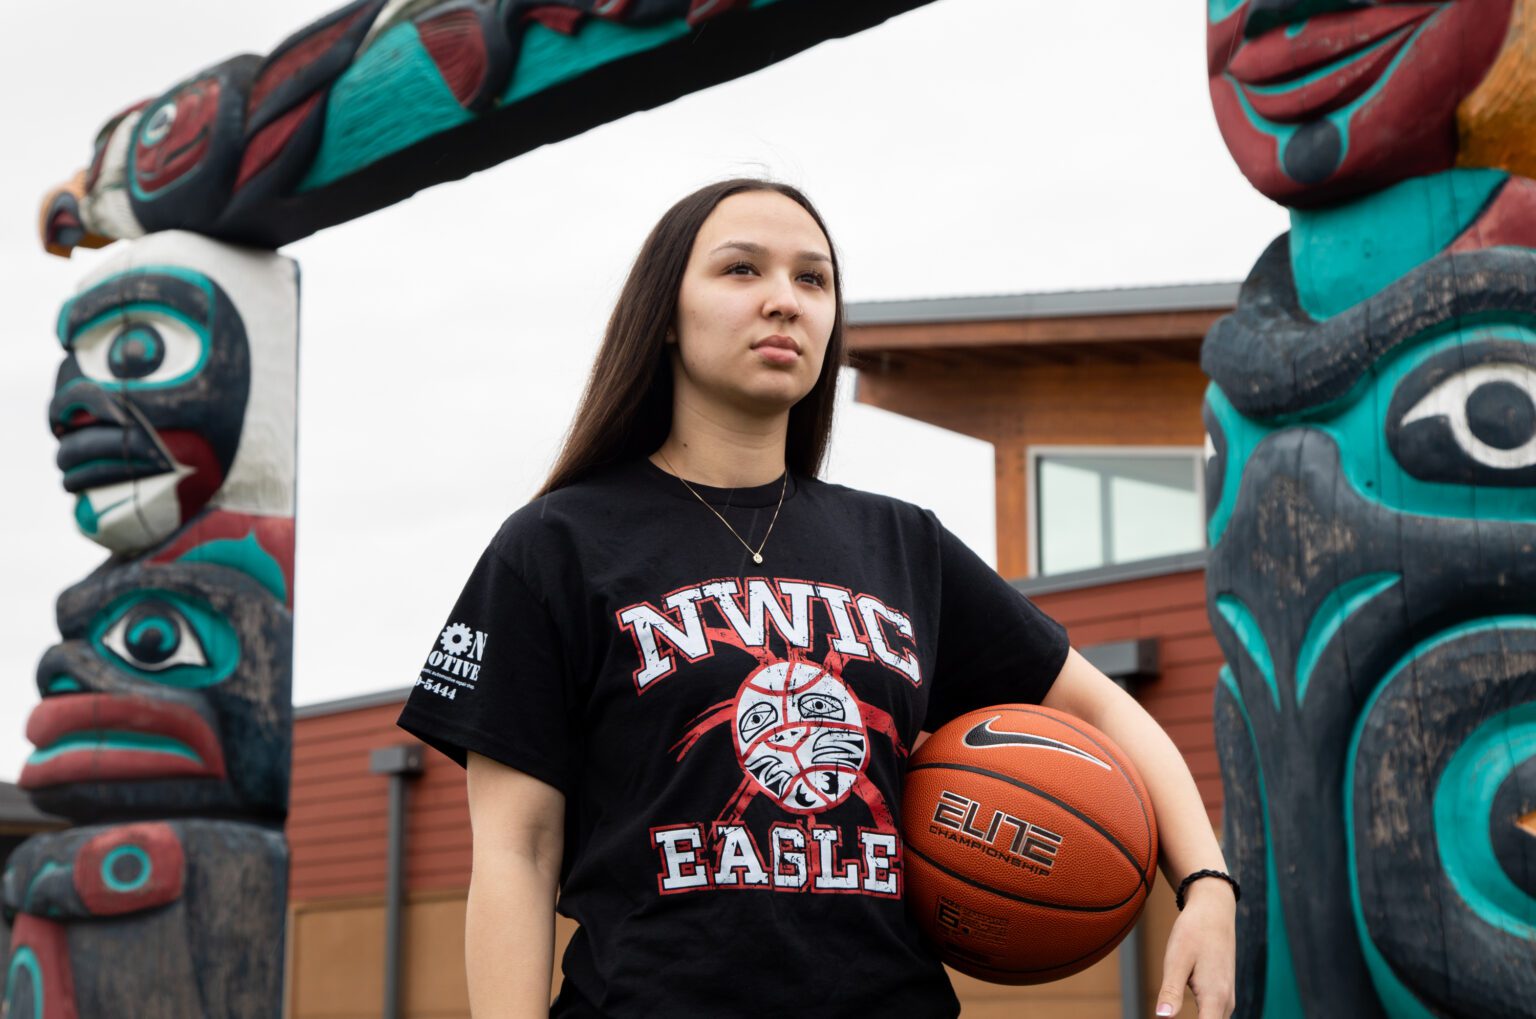 Sara Wolgemuth is a sophomore on the Northwest Indian College women's basketball team. A Bellingham transplant from Utqiaġvik